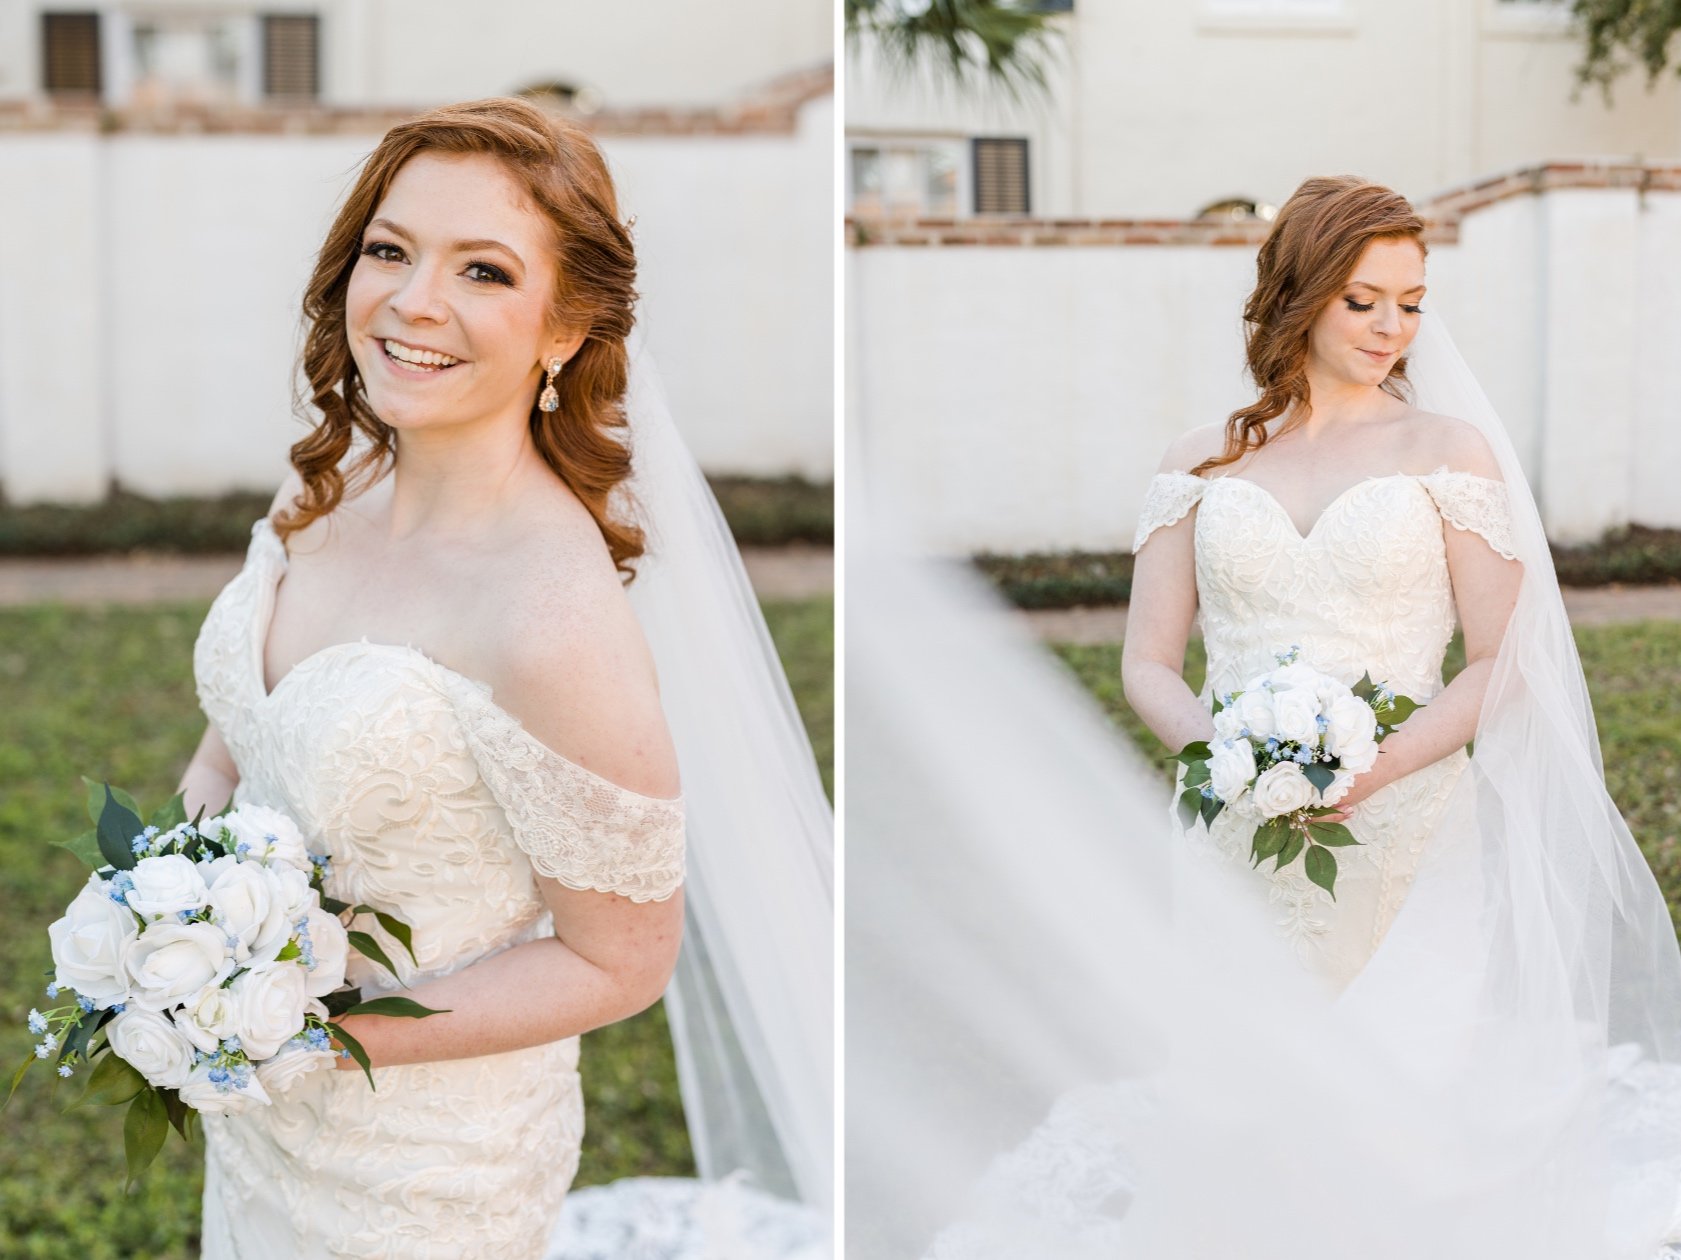 Conde Charlotte Museum Bridal Portrait Session Photographed by Kristen Marcus Photography in Downtown Mobile Alabama